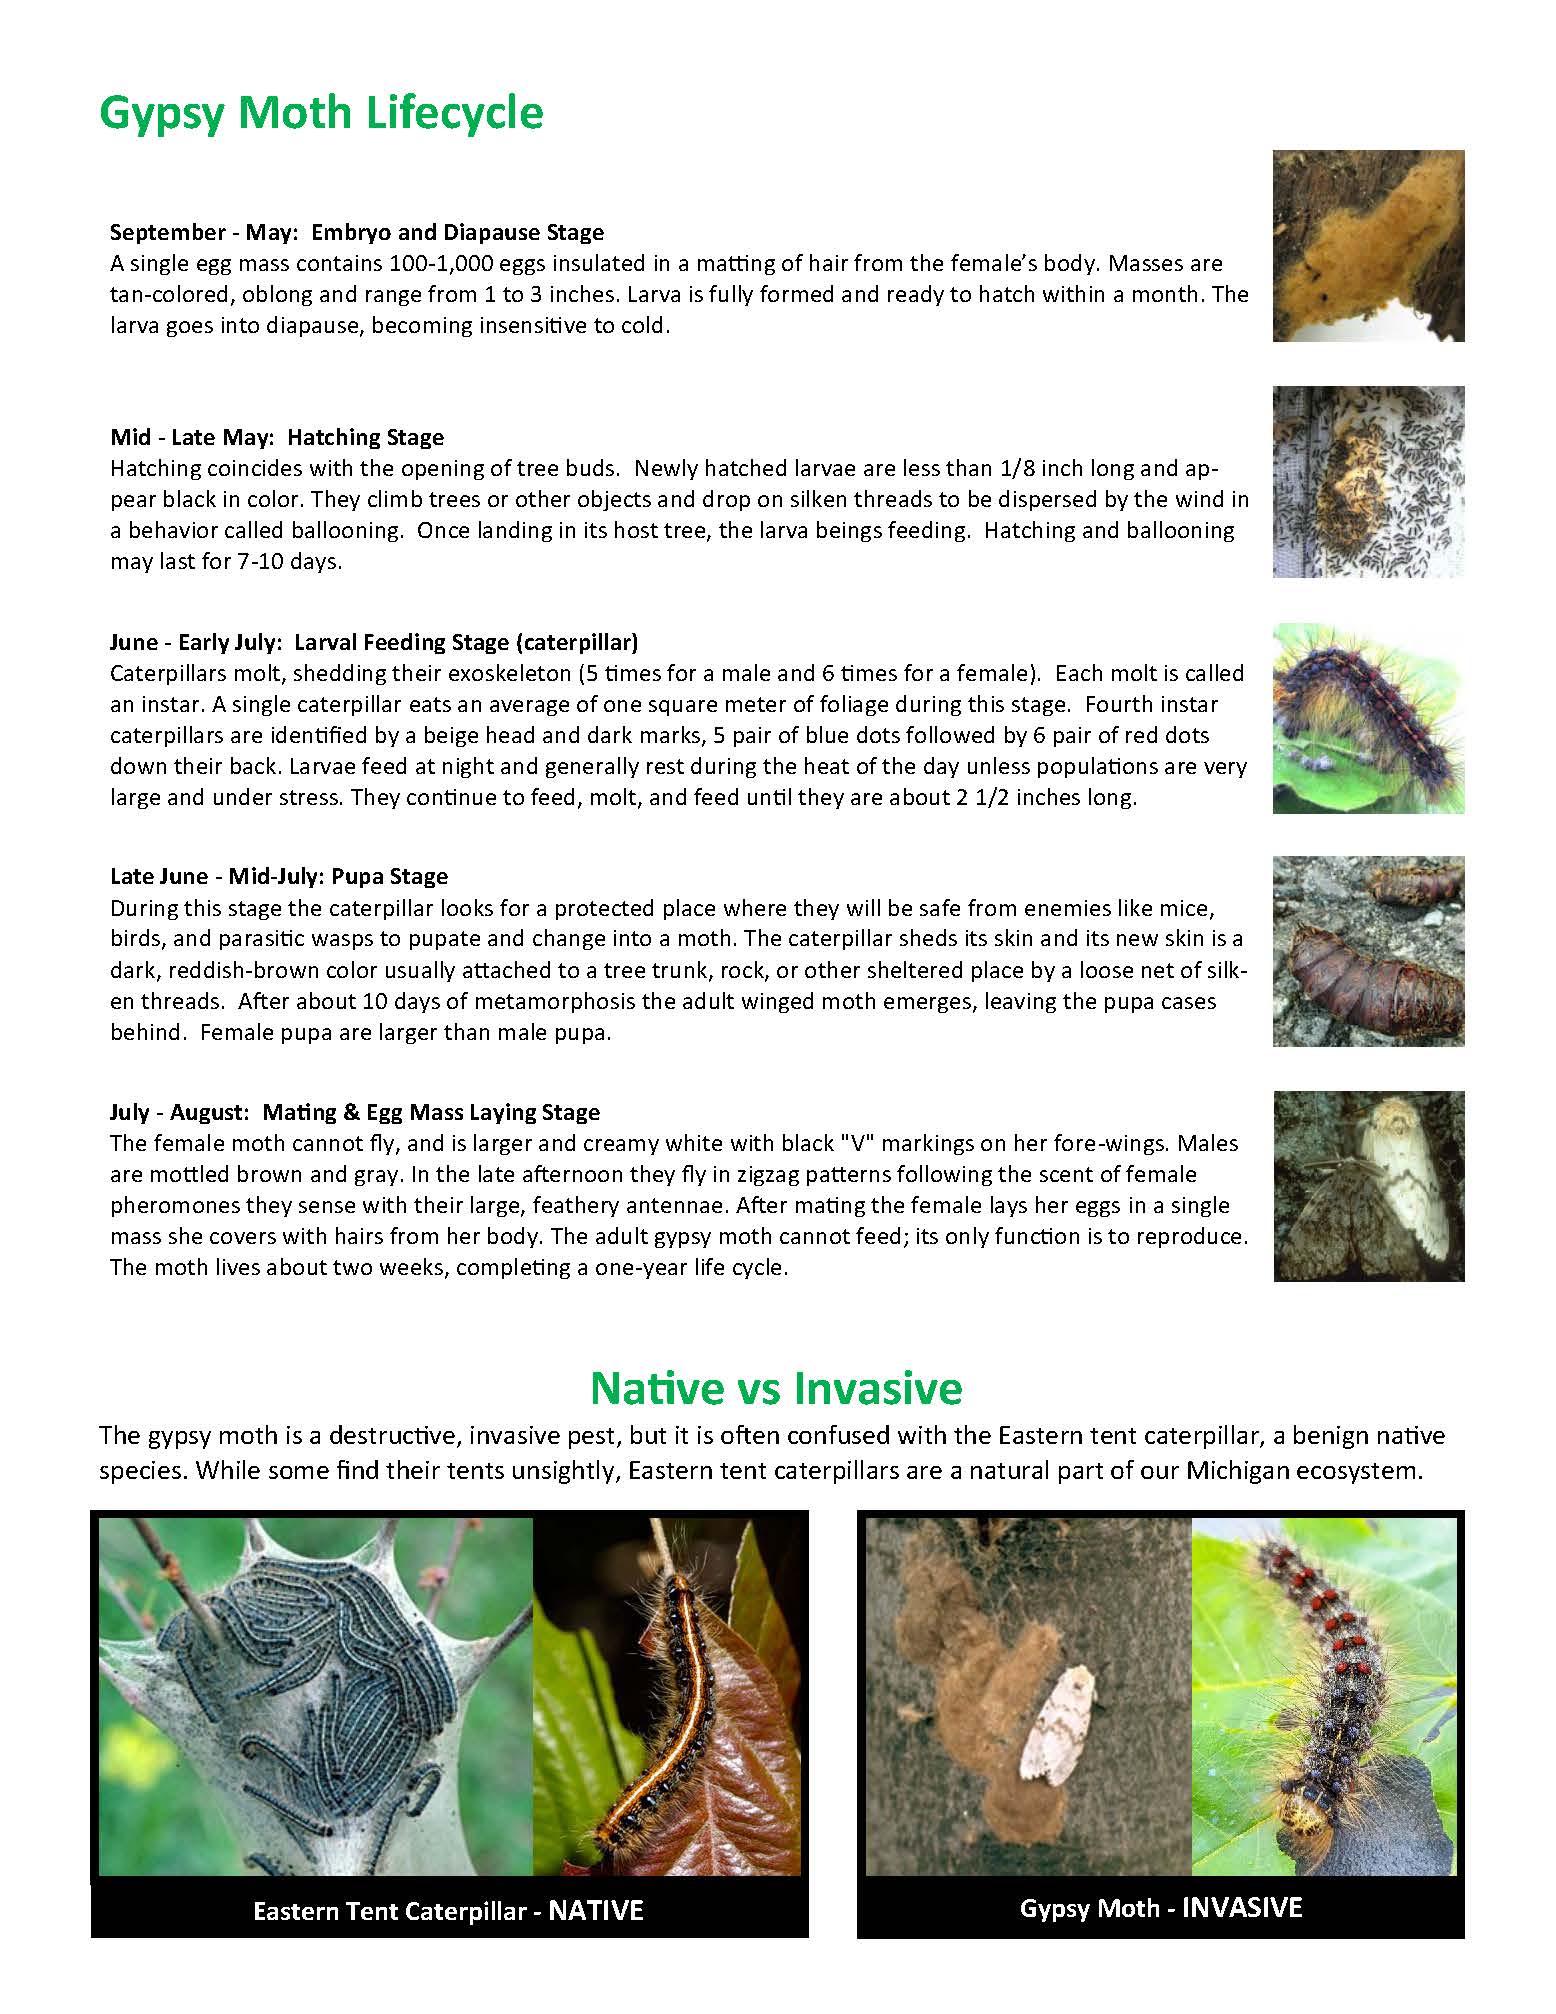 Gypsy Moth Management Strategies_Page_2